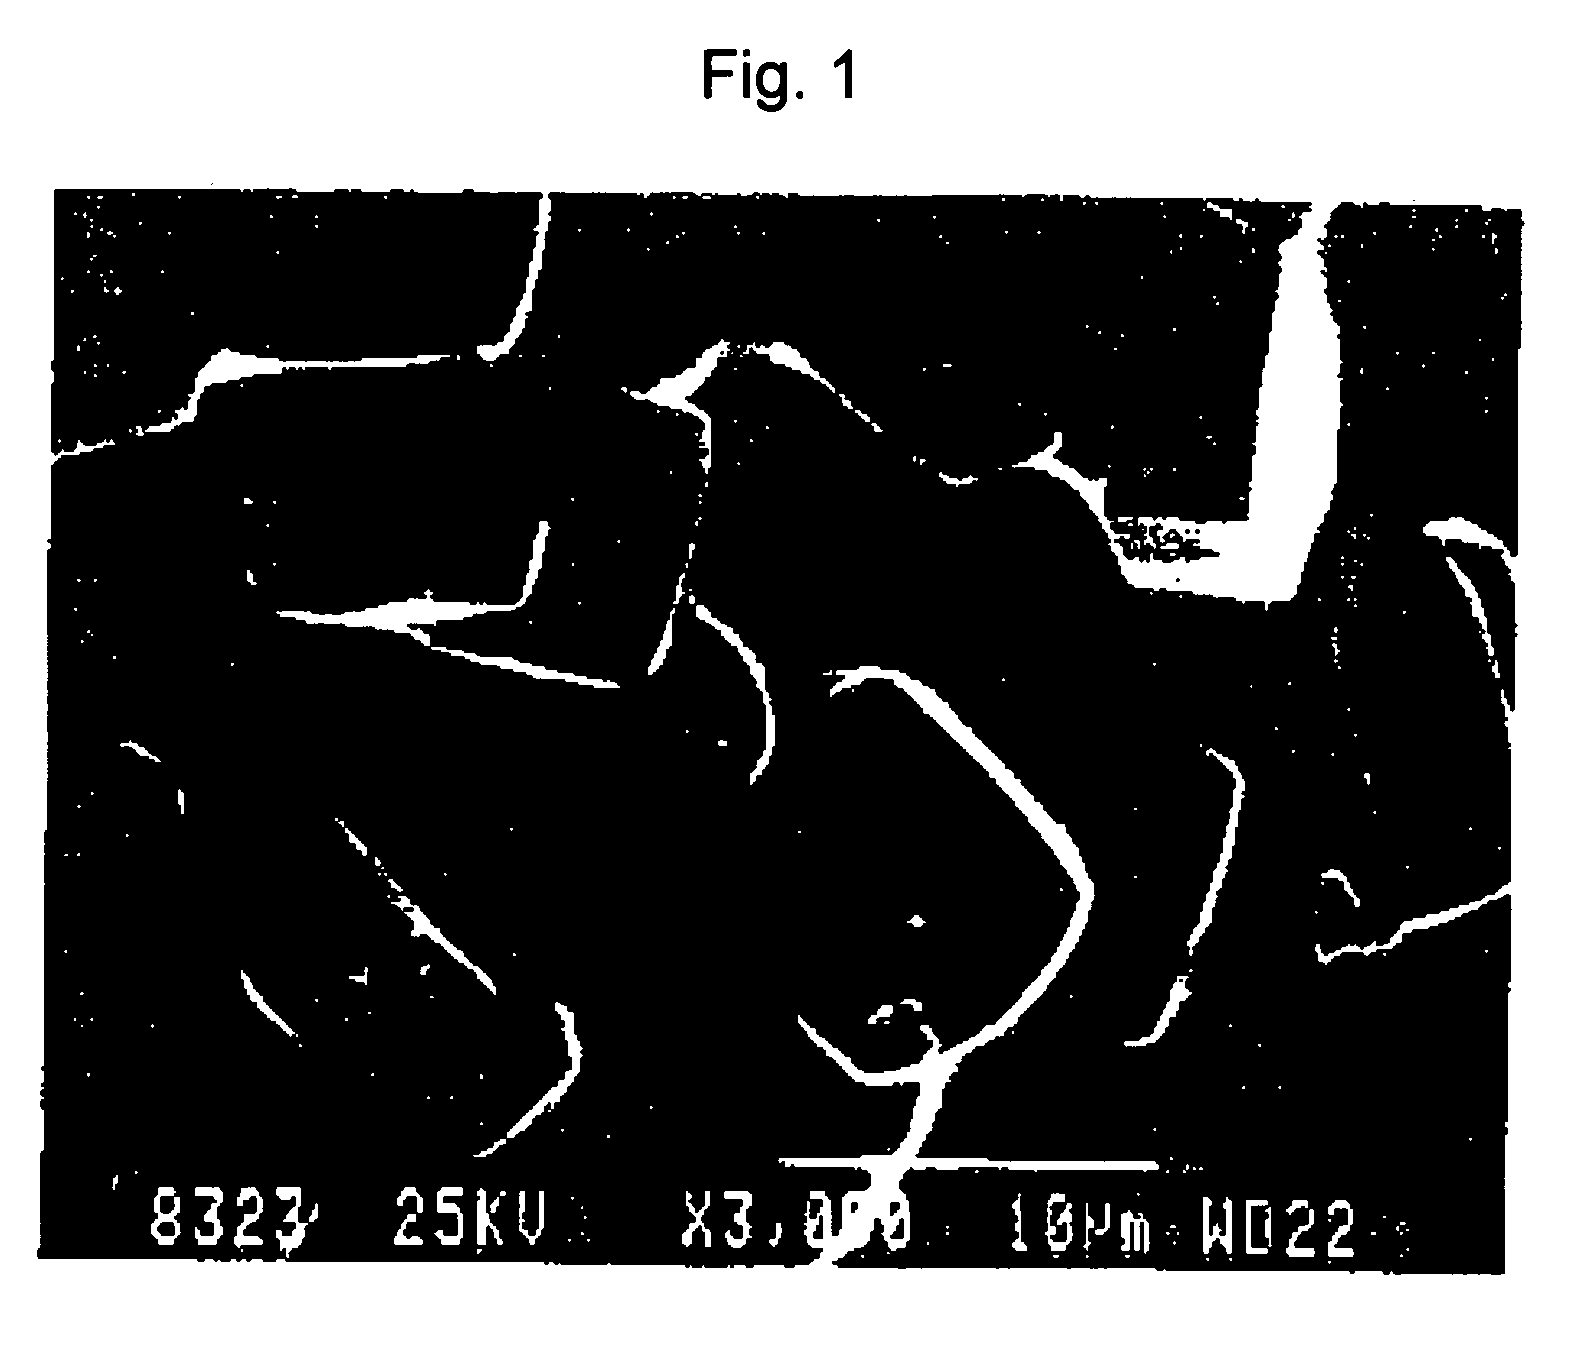 Glass, ceramic and metal substrates with a self-cleaning surface, method of making them and their use